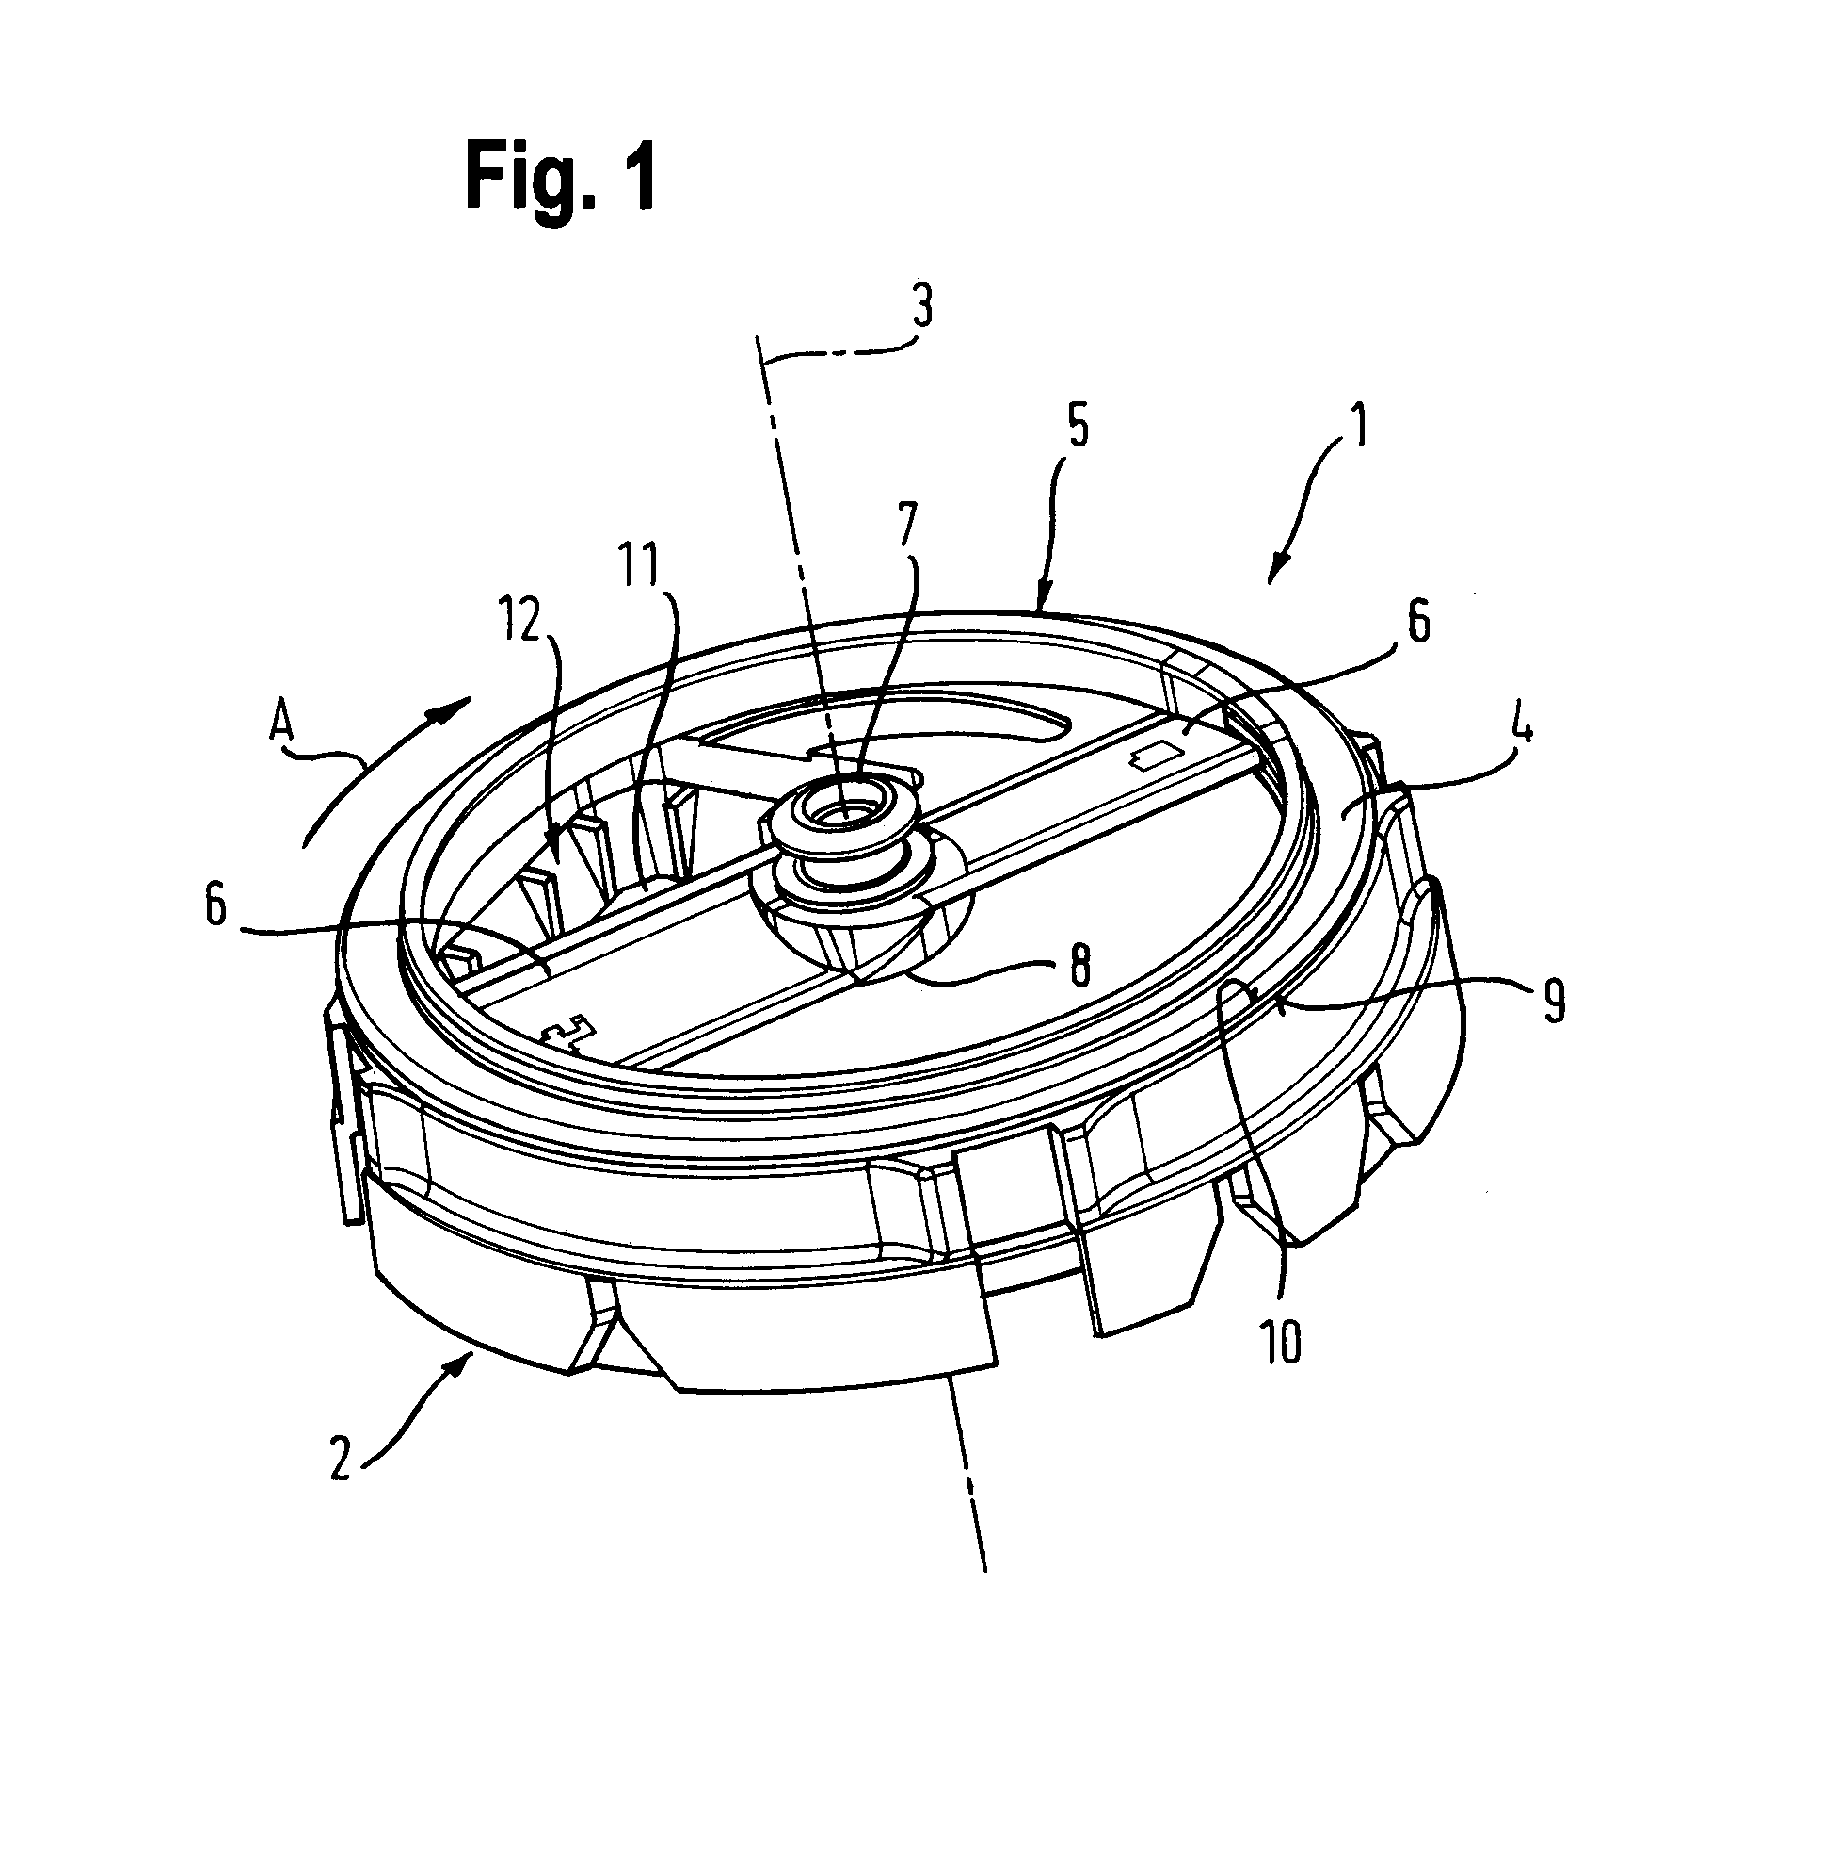 Device for cutting up foodstuffs